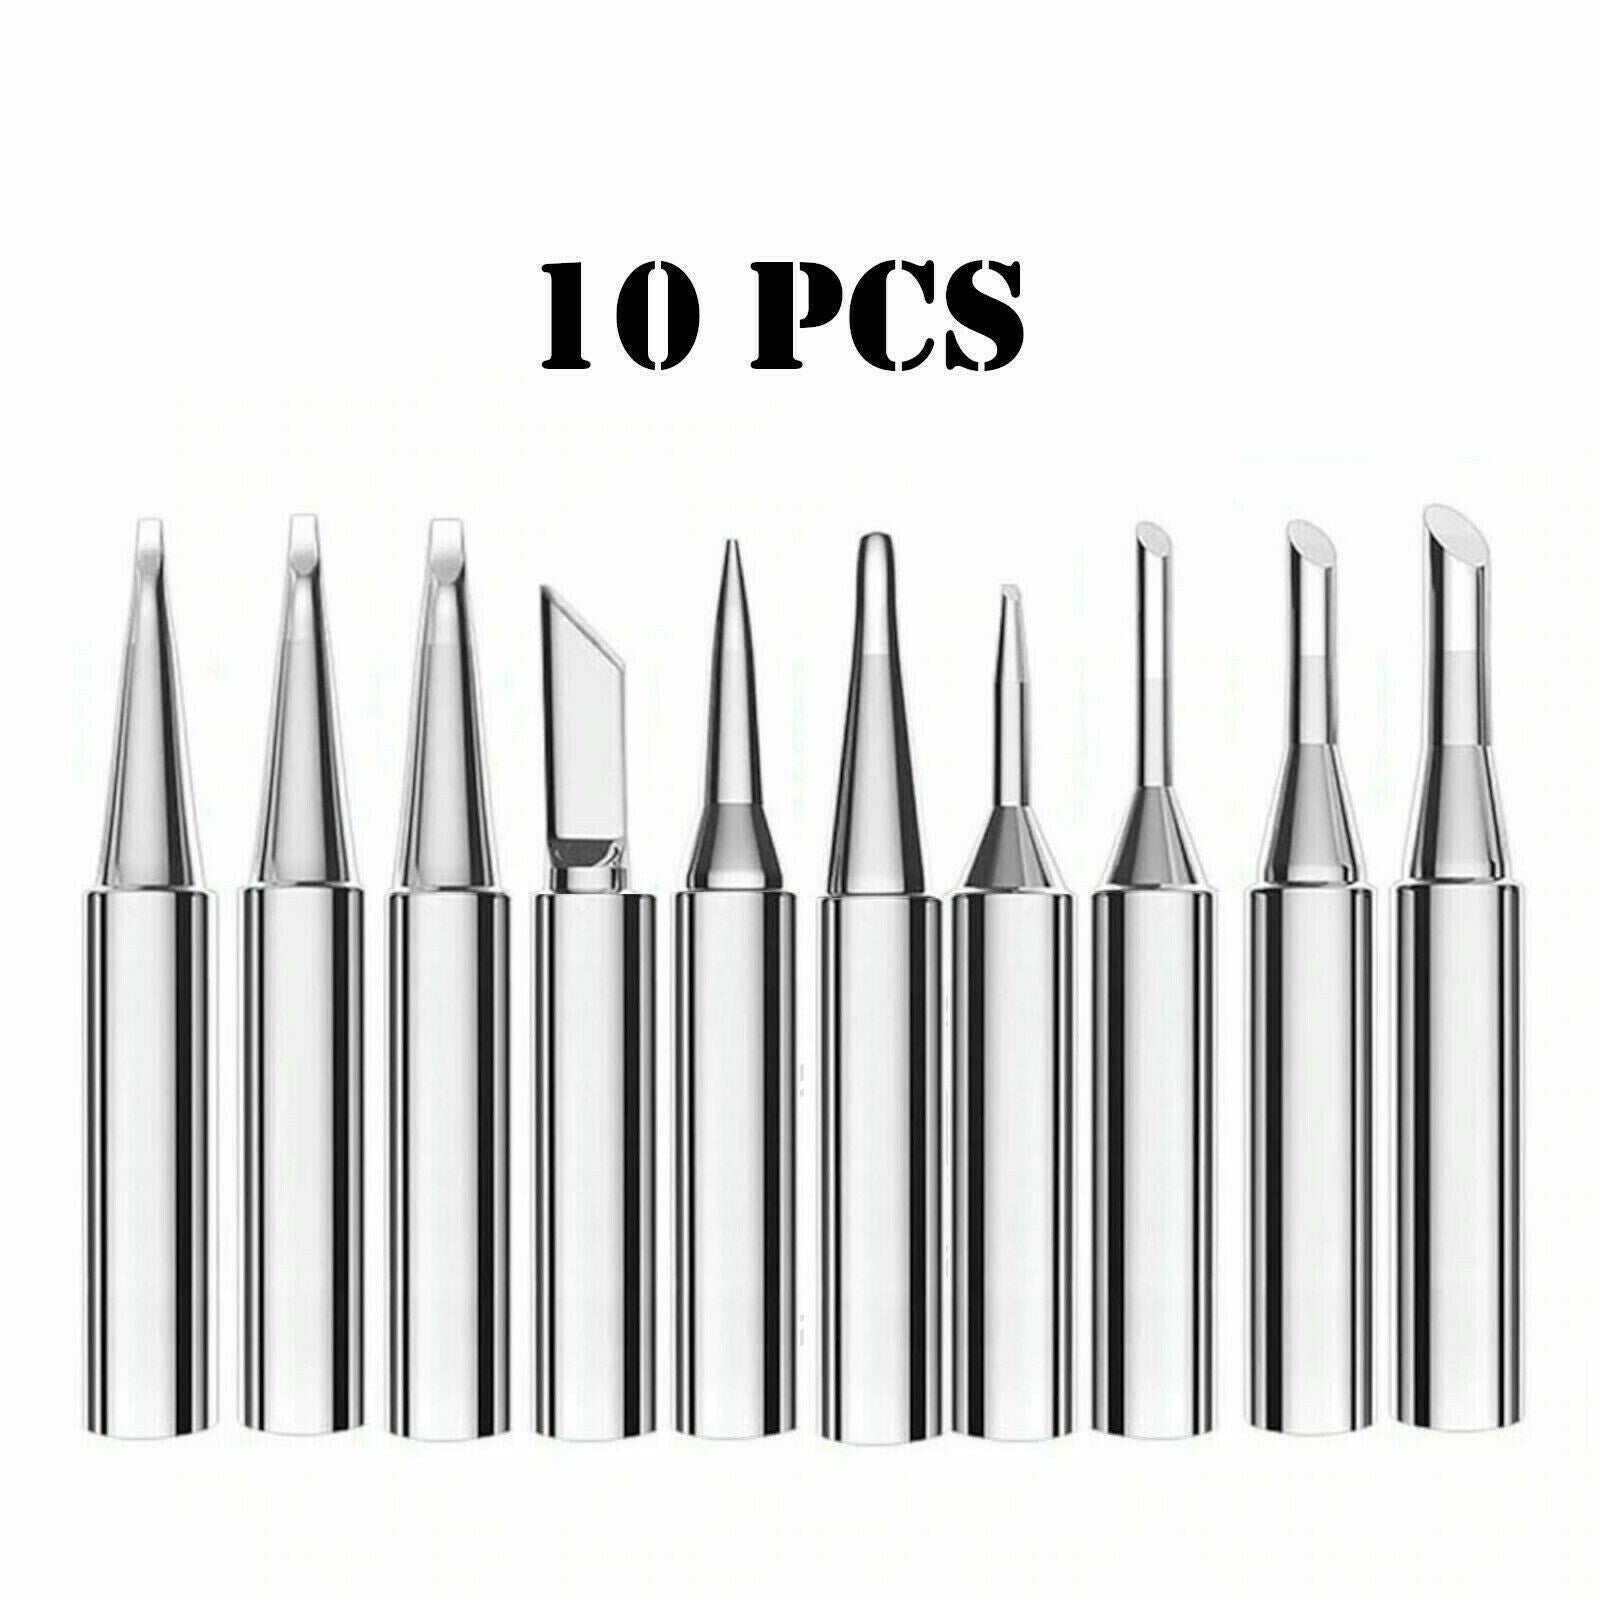 10 Pack Solder Soldering Iron Tips Standard Size Accessories Electrical